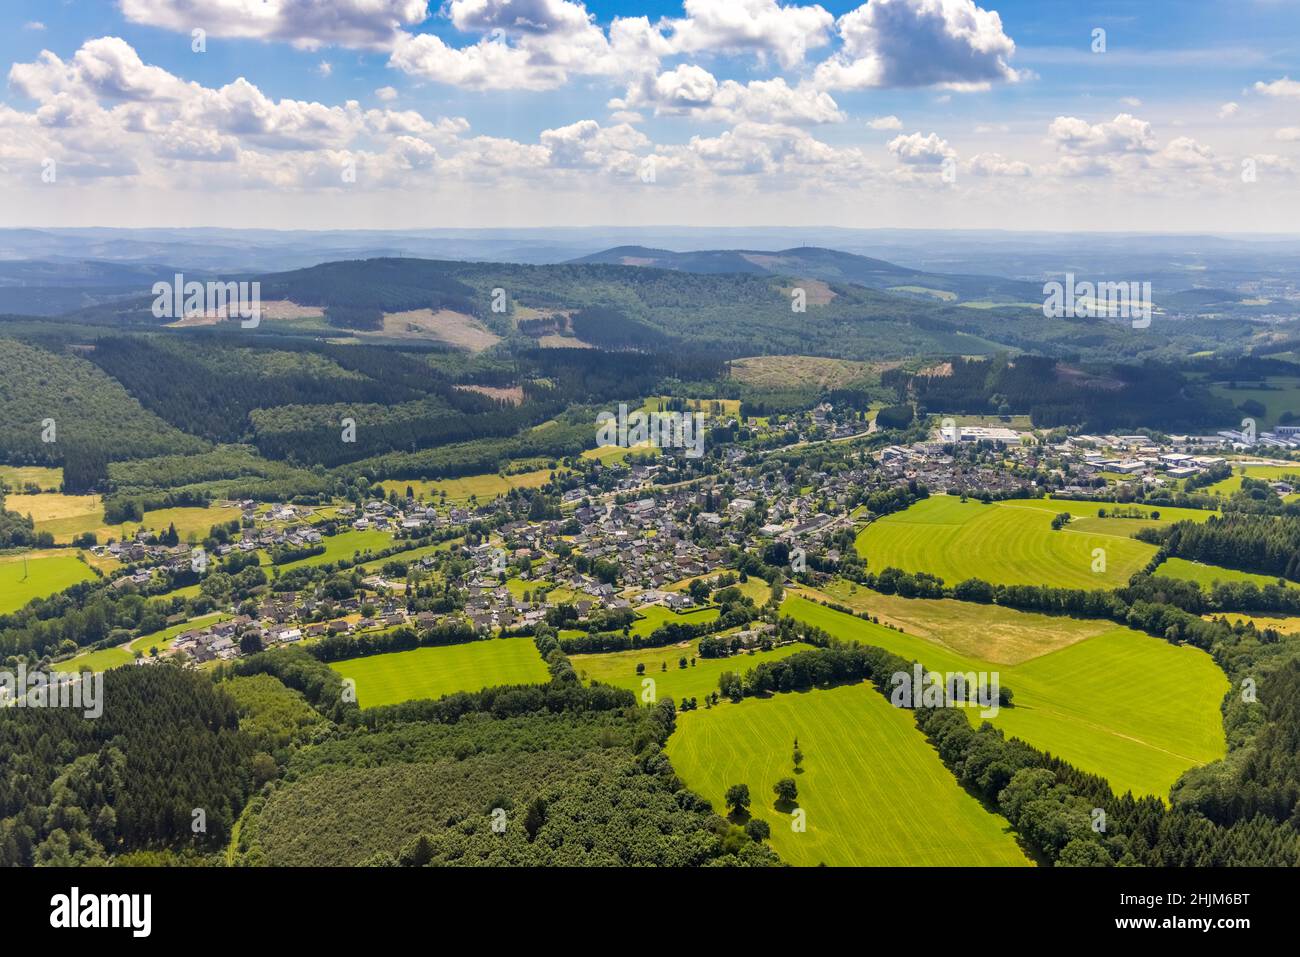 Aerial view, forest area with forest damage, local view Welschen-Ennest, Kirchhundem, Sauerland, North Rhine-Westphalia, Germany, tree dieback, bark b Stock Photo